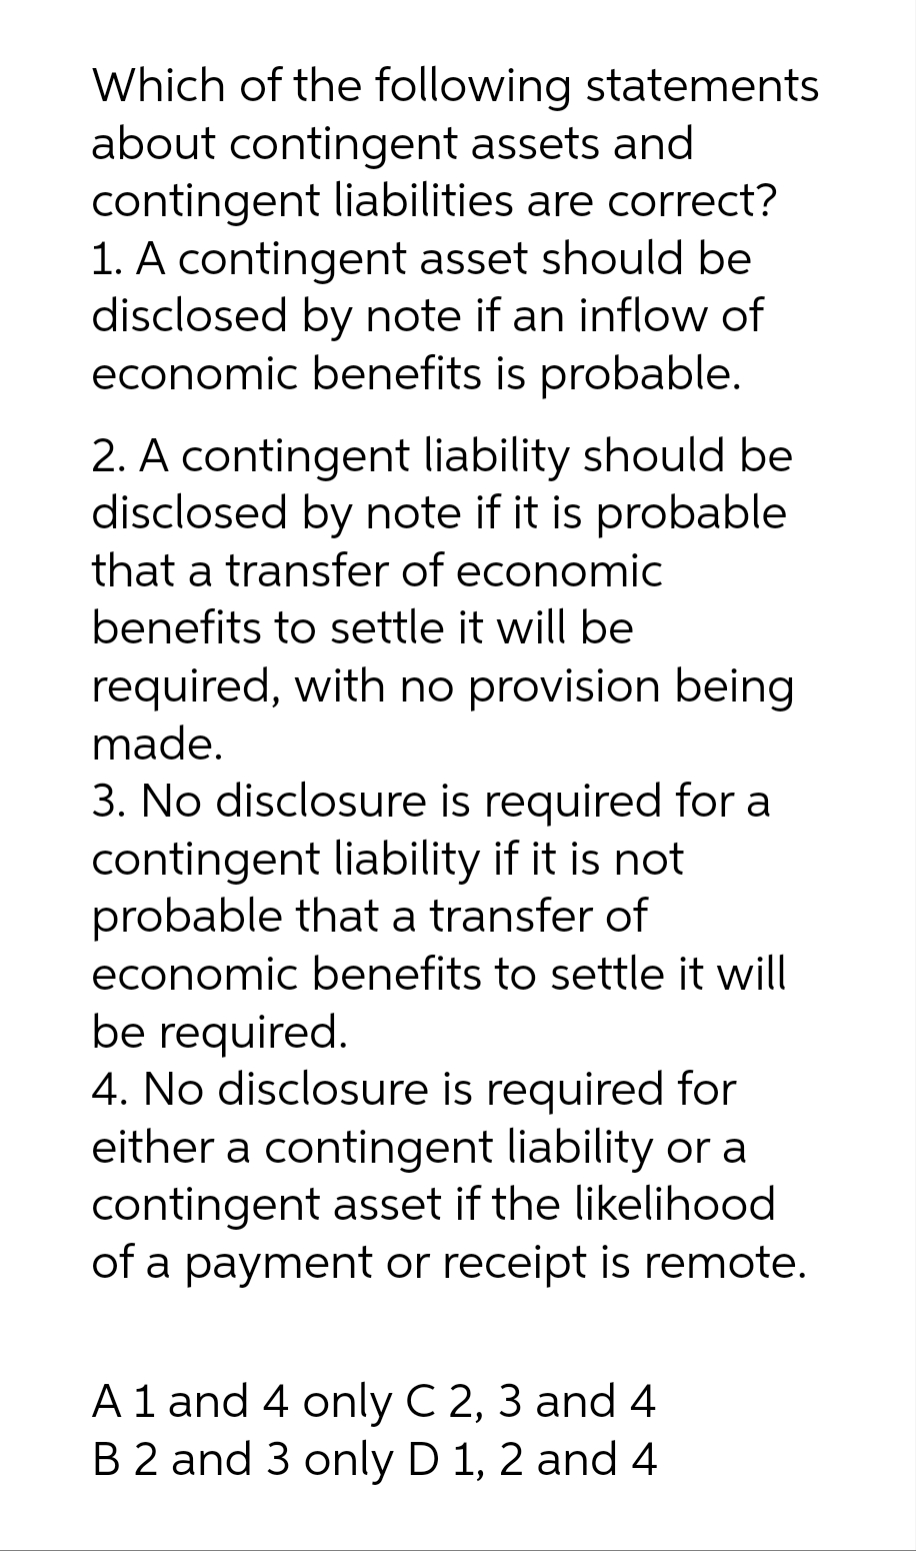 Which of the following statements
about contingent assets and
contingent liabilities are correct?
1. A contingent asset should be
disclosed by note if an inflow of
economic benefits is probable.
2. A contingent liability should be
disclosed by note if it is probable
that a transfer of economic
benefits to settle it will be
required, with no provision being
made.
3. No disclosure is required for a
contingent liability if it is not
probable that a transfer of
economic benefits to settle it will
be required.
4. No disclosure is required for
either a contingent liability or a
contingent asset if the likelihood
of a payment or receipt is remote.
A 1 and 4 only C 2, 3 and 4
B 2 and 3 only D 1, 2 and 4